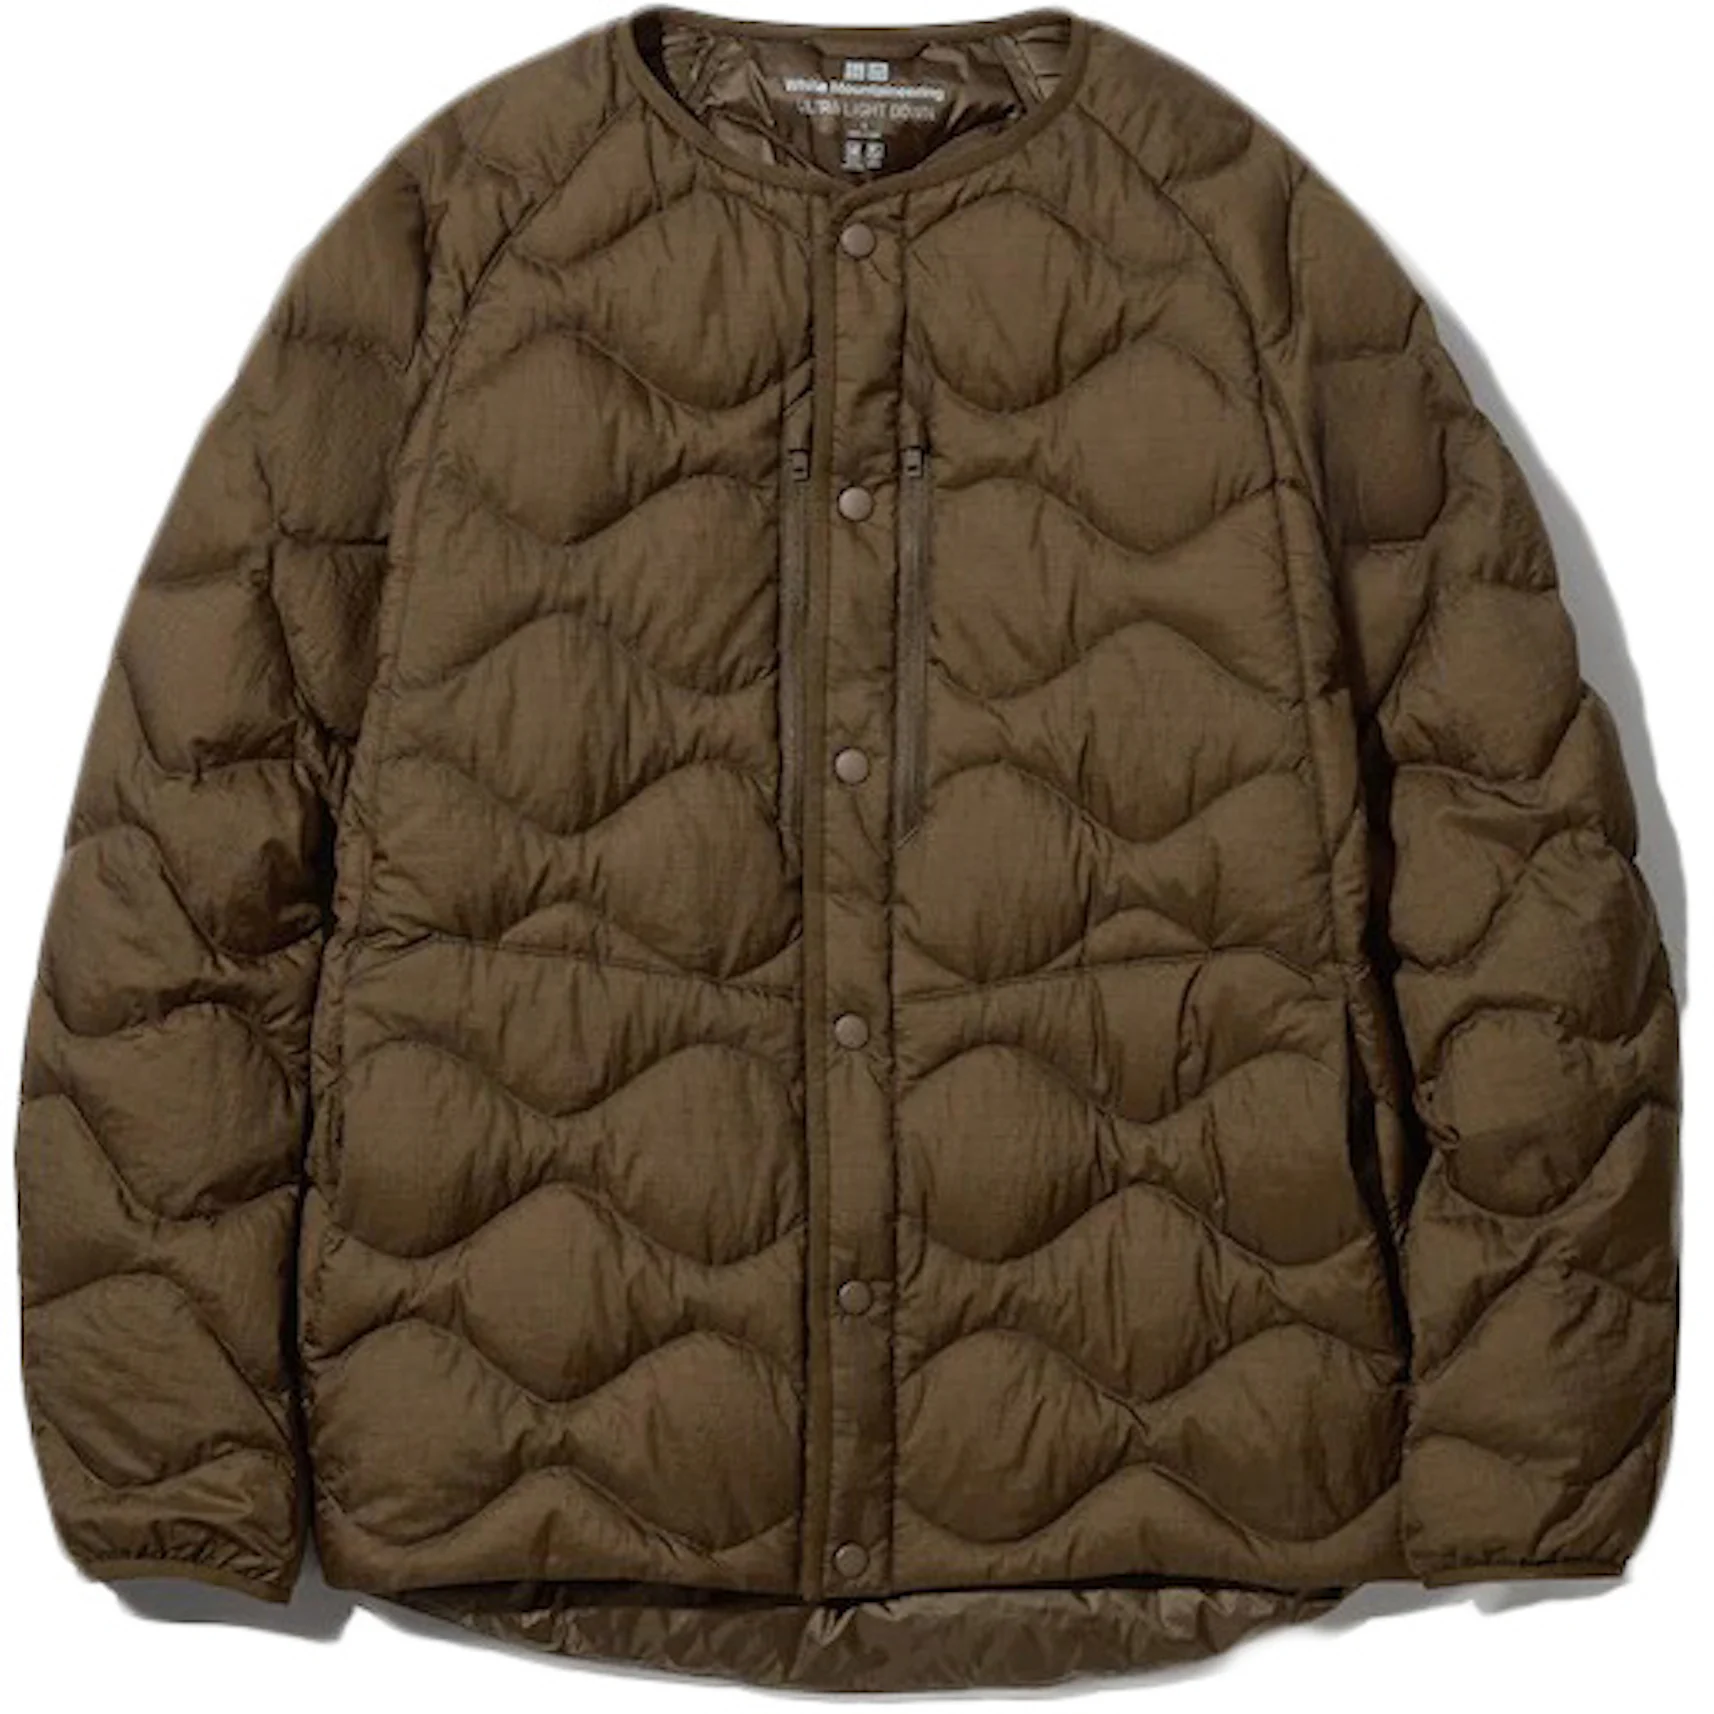 https://images.stockx.com/images/Uniqlo-x-White-Mountaineering-Ultra-Light-Down-Oversized-Jacket-Brown.jpg?fit=fill&bg=FFFFFF&w=1200&h=857&fm=webp&auto=compress&dpr=2&trim=color&updated_at=1635815887&q=60